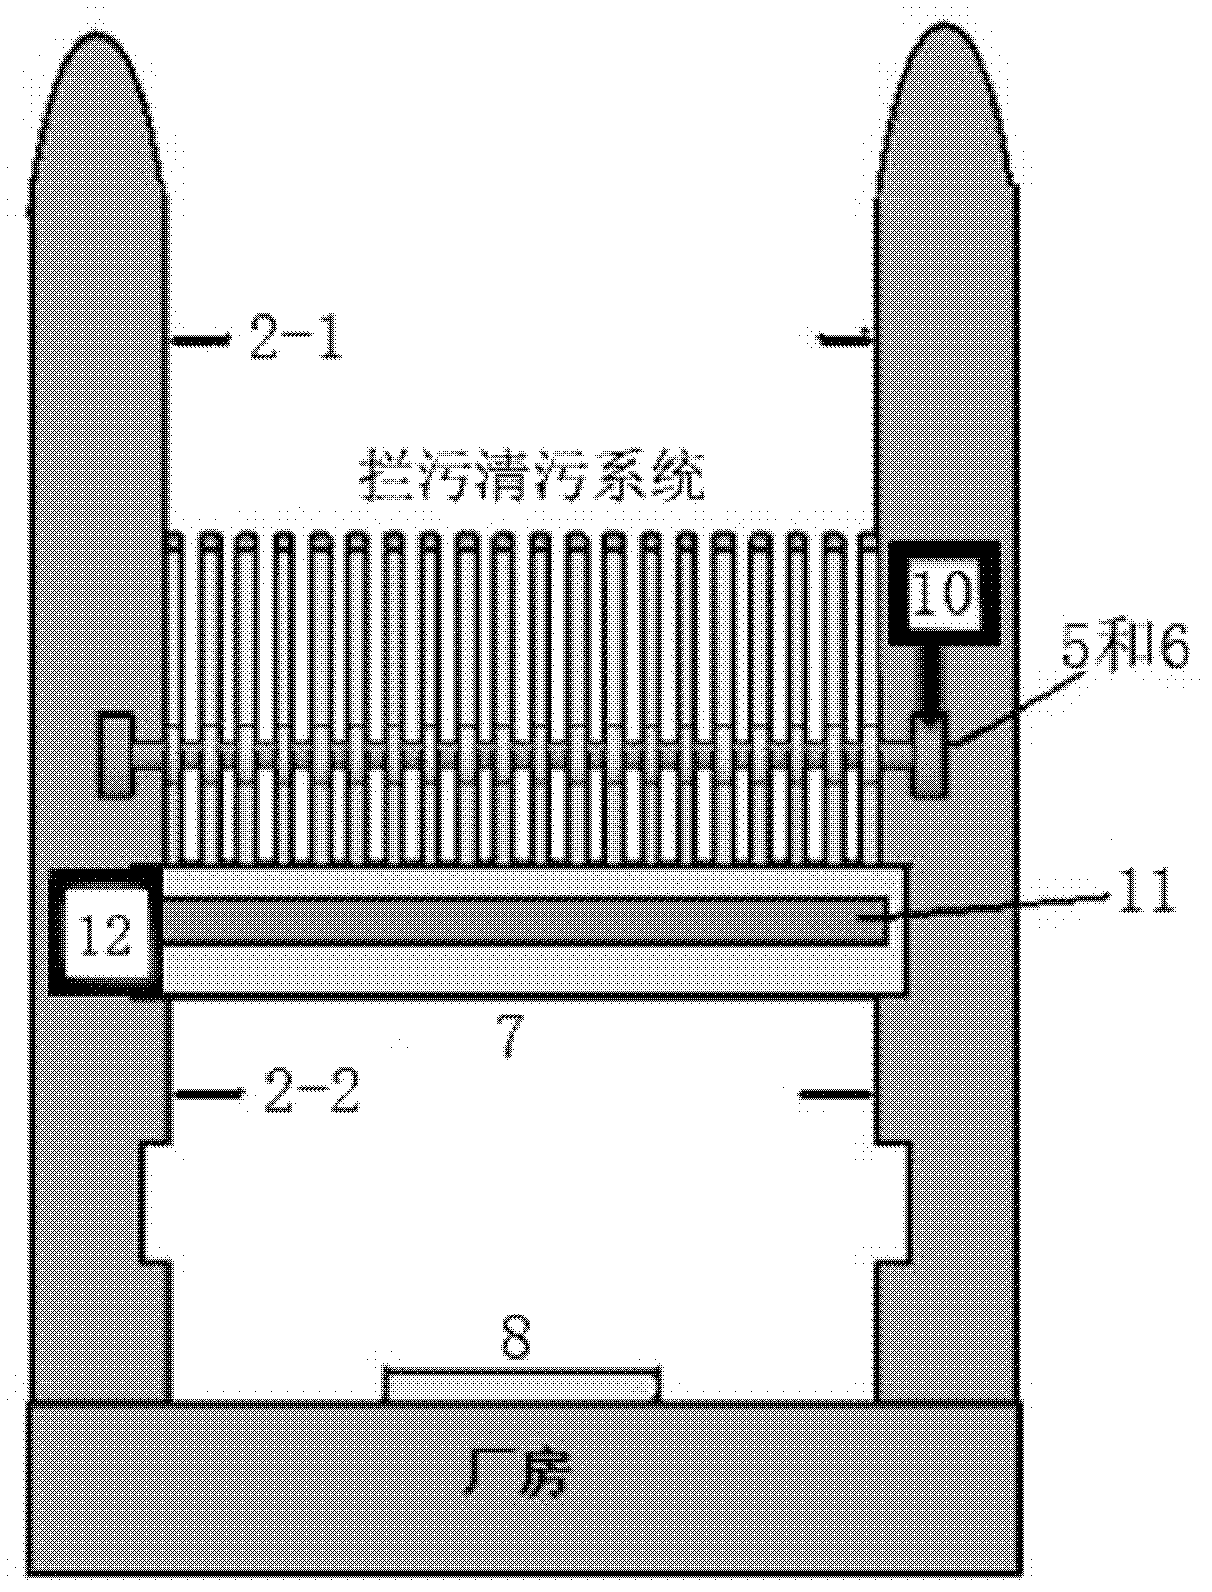 Fold-line-shaped and fan-shaped biaxial rotary sewage blocking and sewage cleaning system